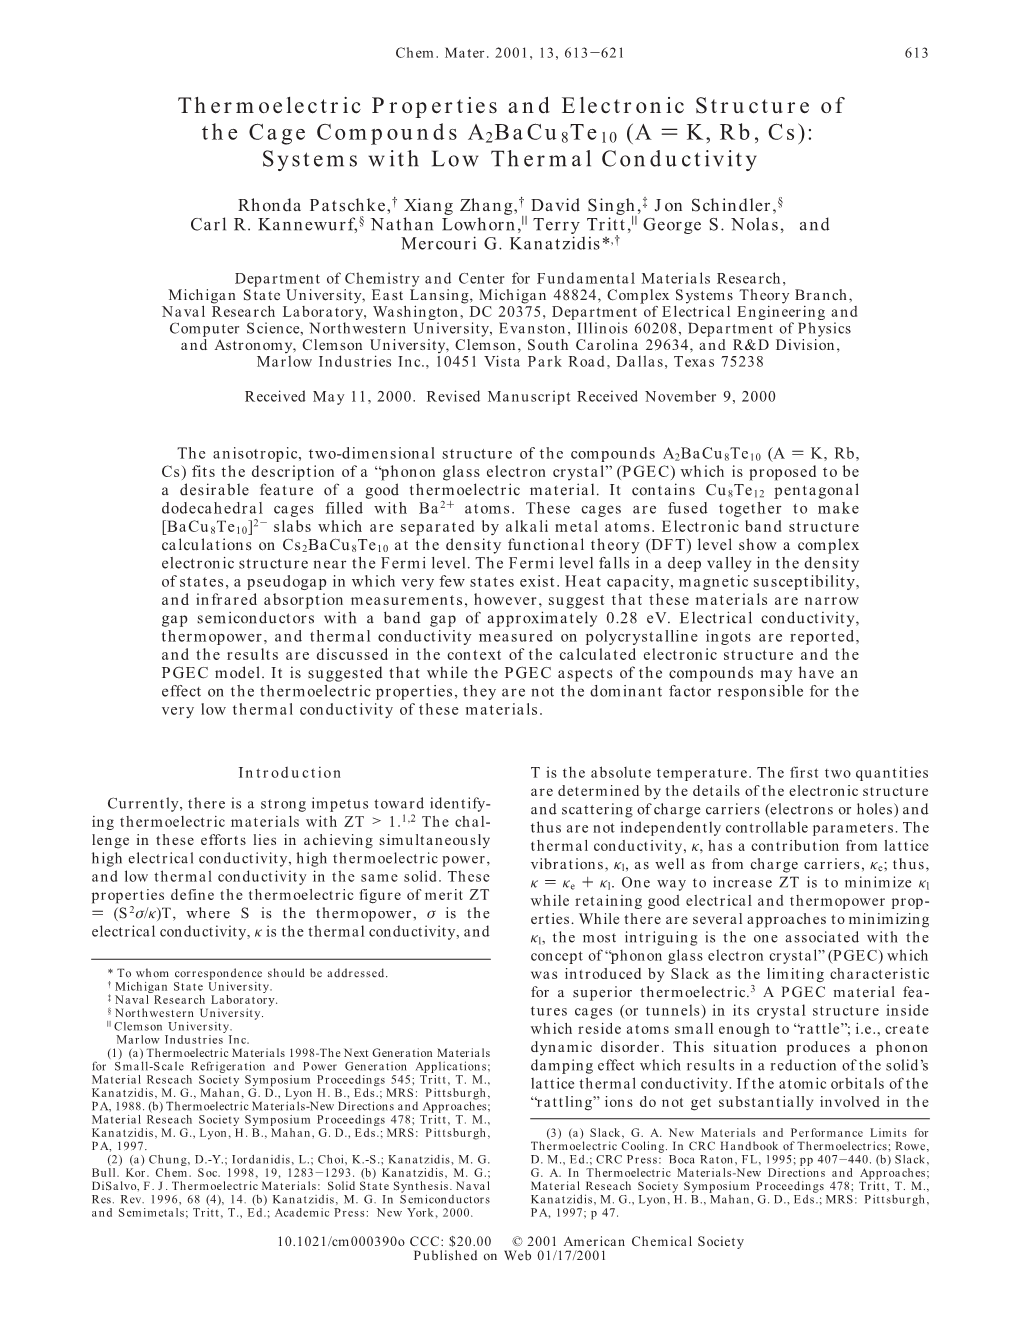 Thermoelectric Properties and Electronic Structure of the Cage Compounds A2bacu8te10 (A ) K, Rb, Cs): Systems with Low Thermal Conductivity